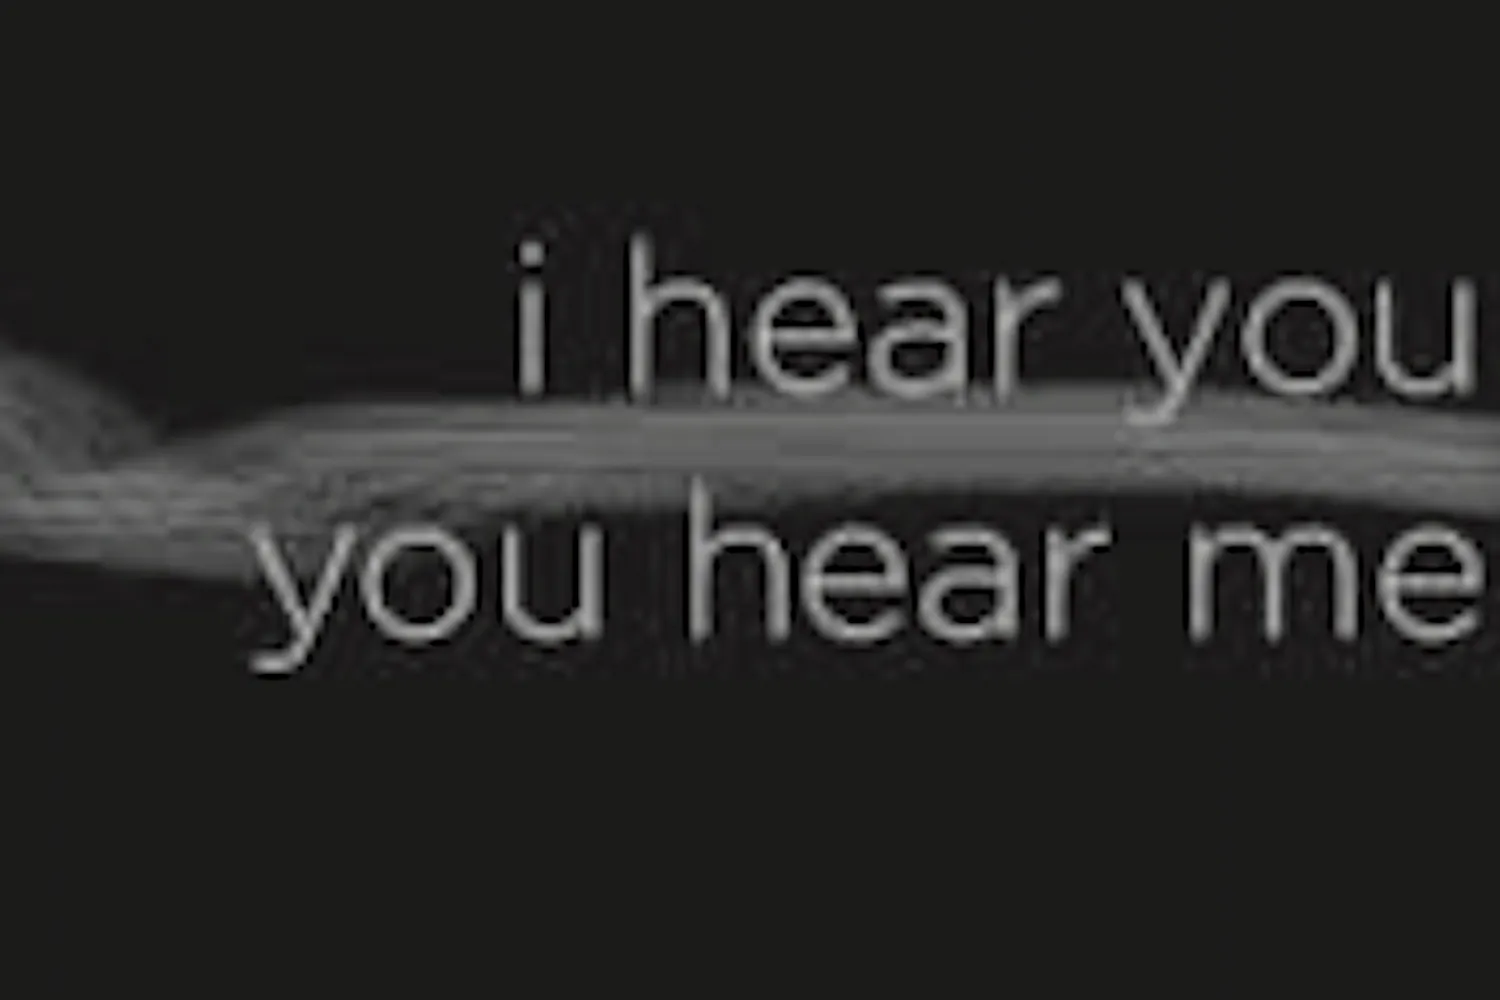 The text 'i hear you' above the text 'you hear me'